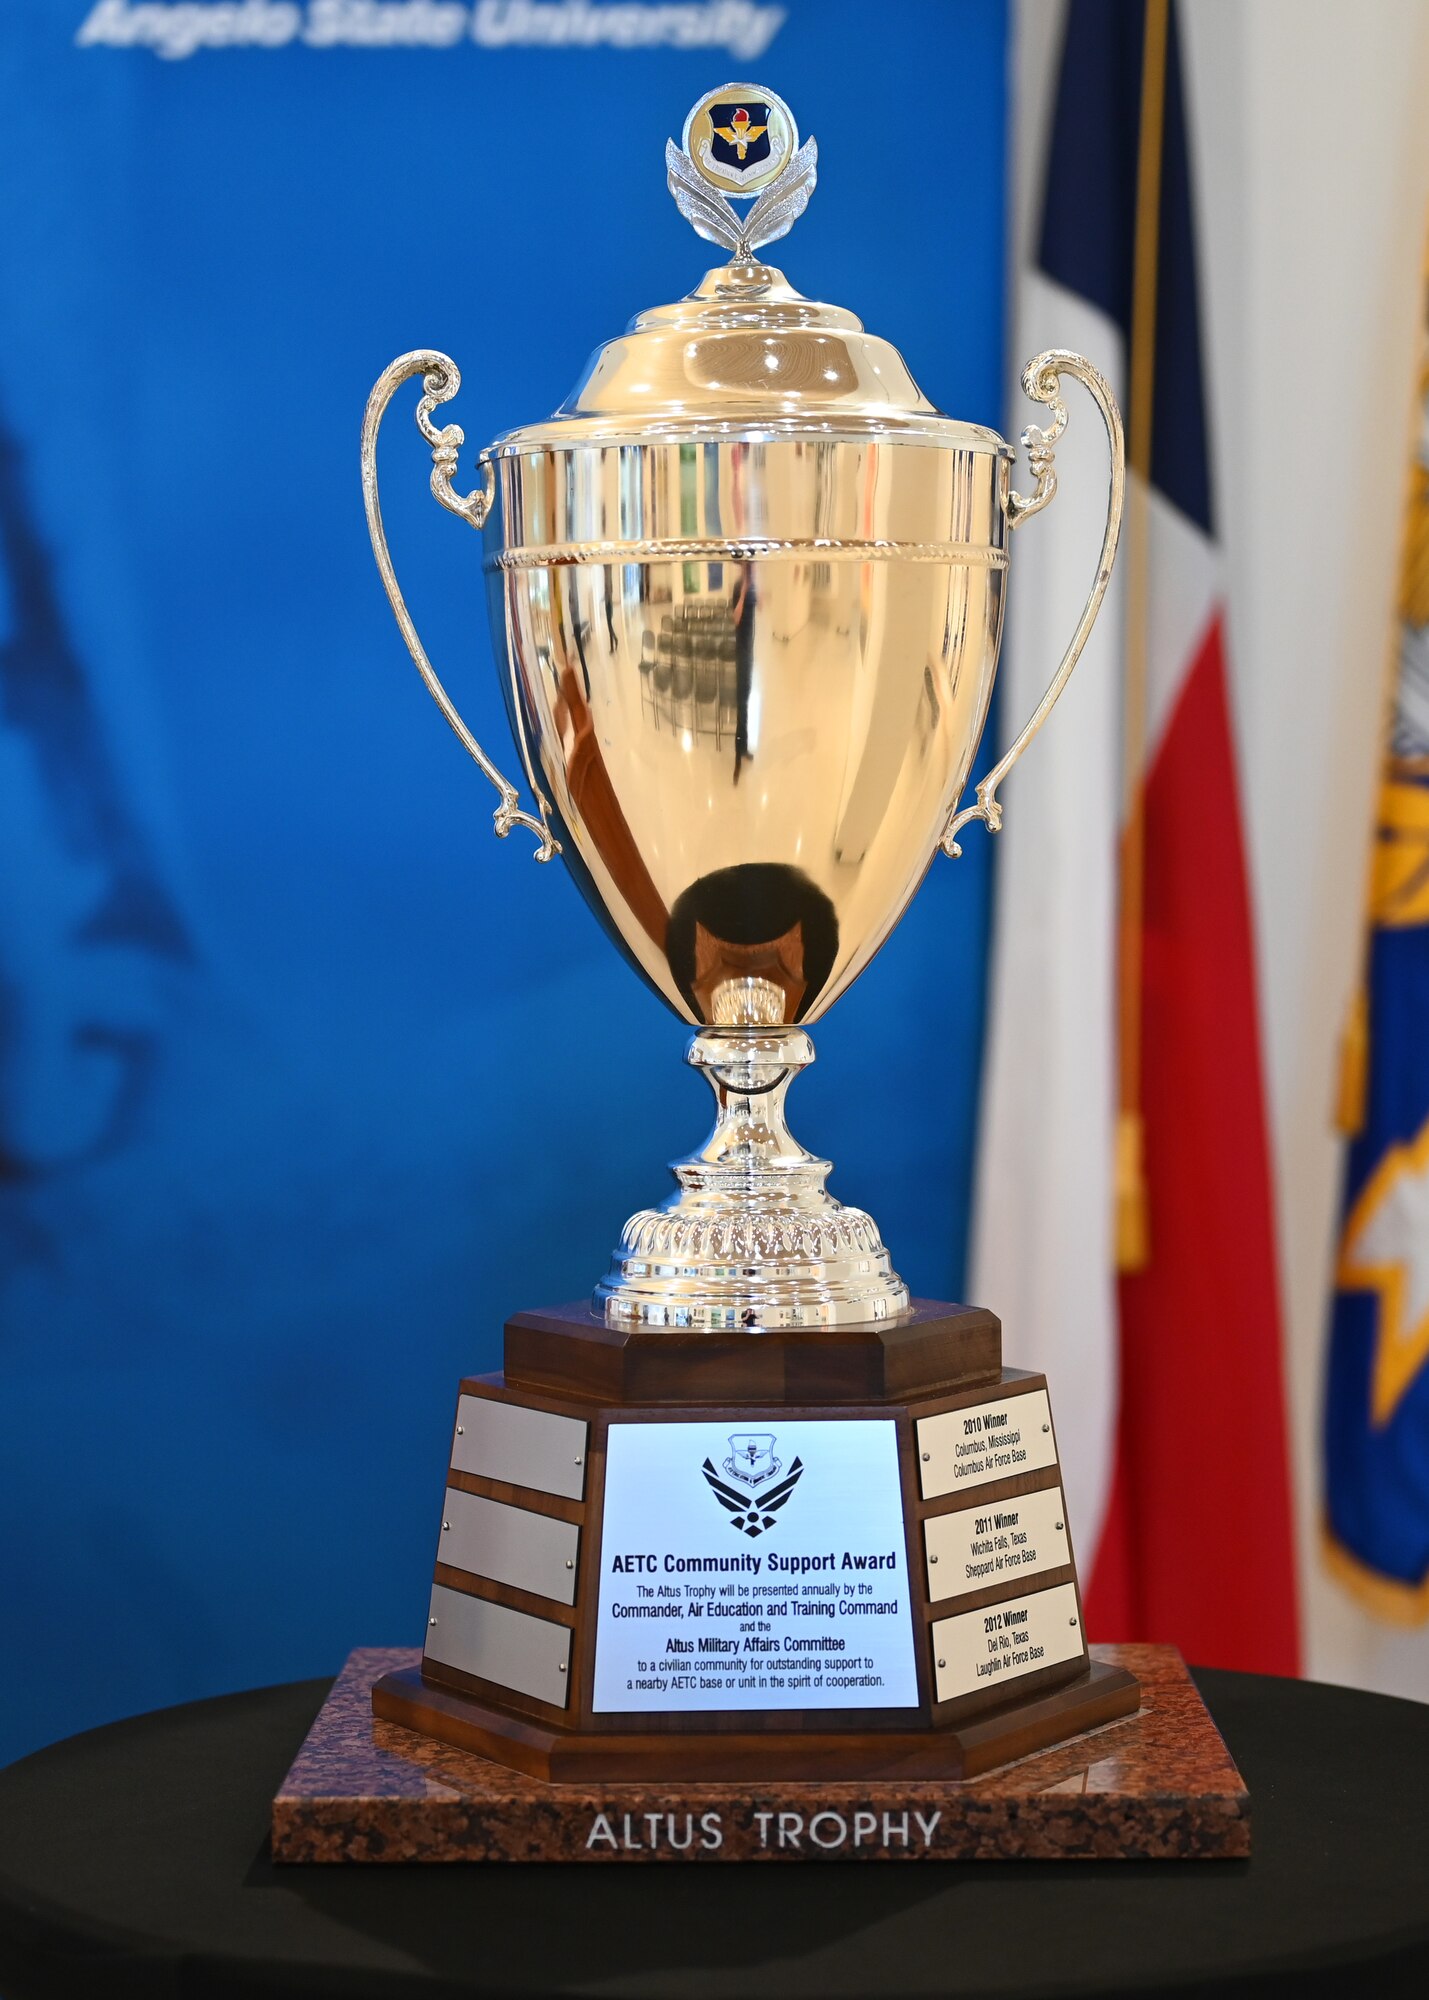 The Altus Trophy sits on display at the Mayer Museum, San Angelo, Texas, Aug. 11, 2022. The Altus Trophy is an annual award given to a community that provides outstanding support for an Air Education and Training Command installation. (U.S. Air Force photo by Senior Airman Ethan Sherwood)